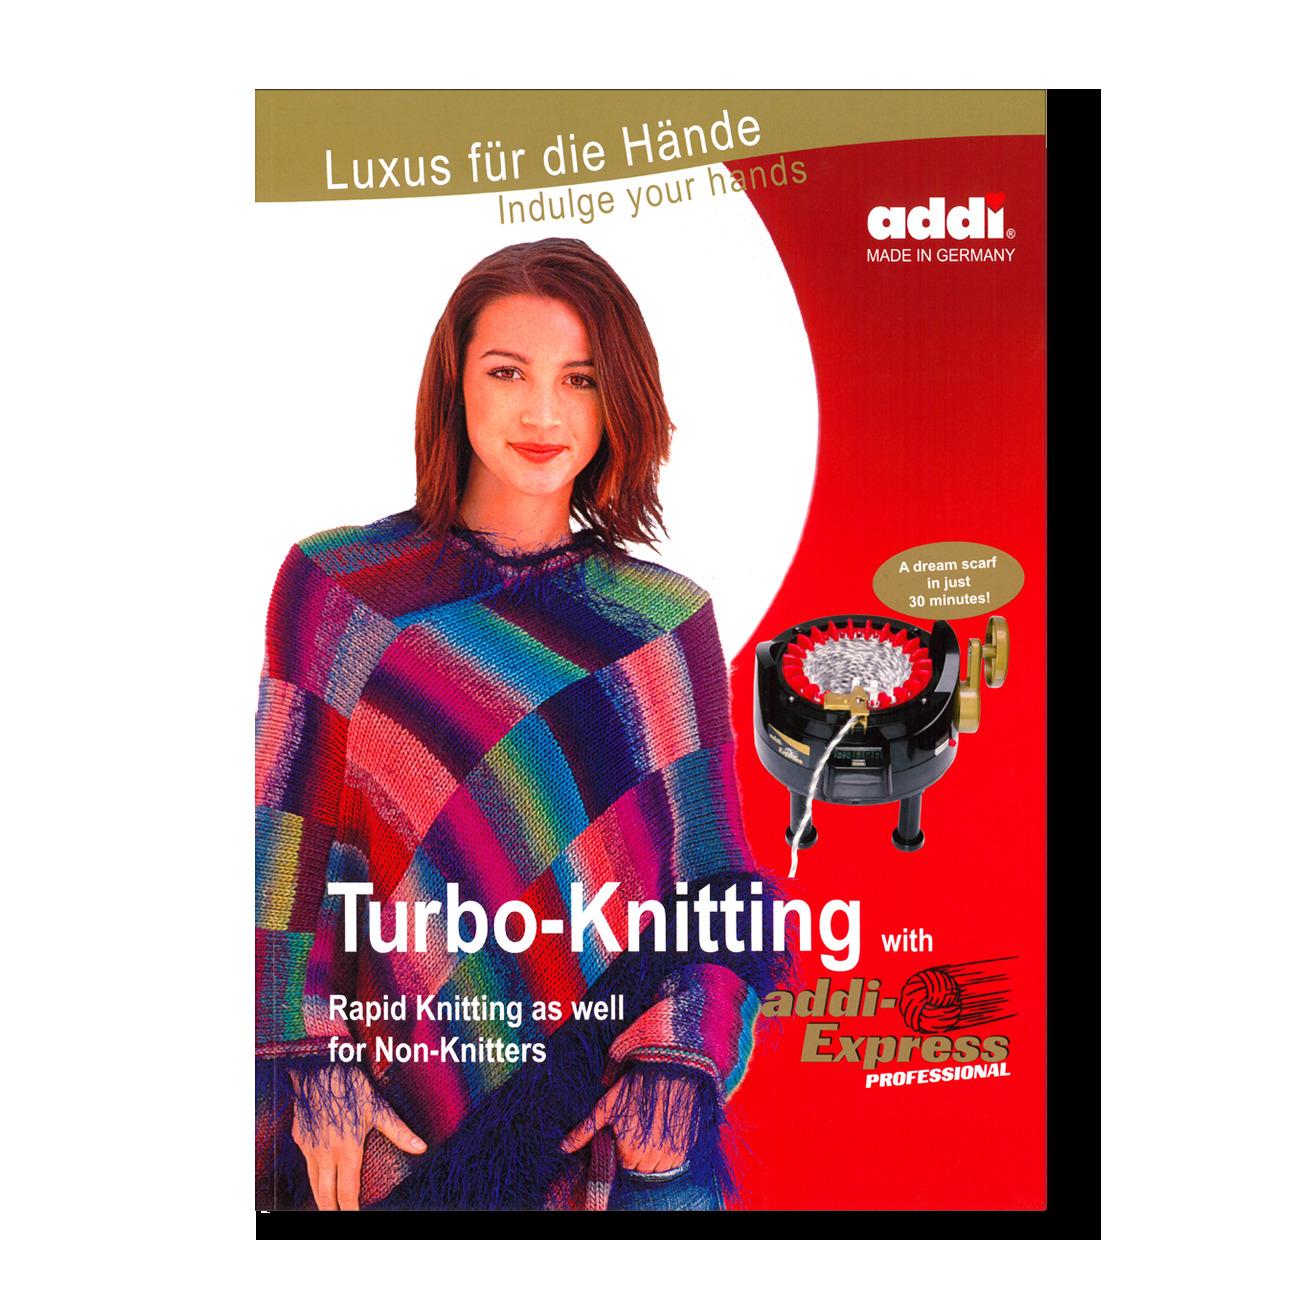 Turbo Knitting with the addiExpress